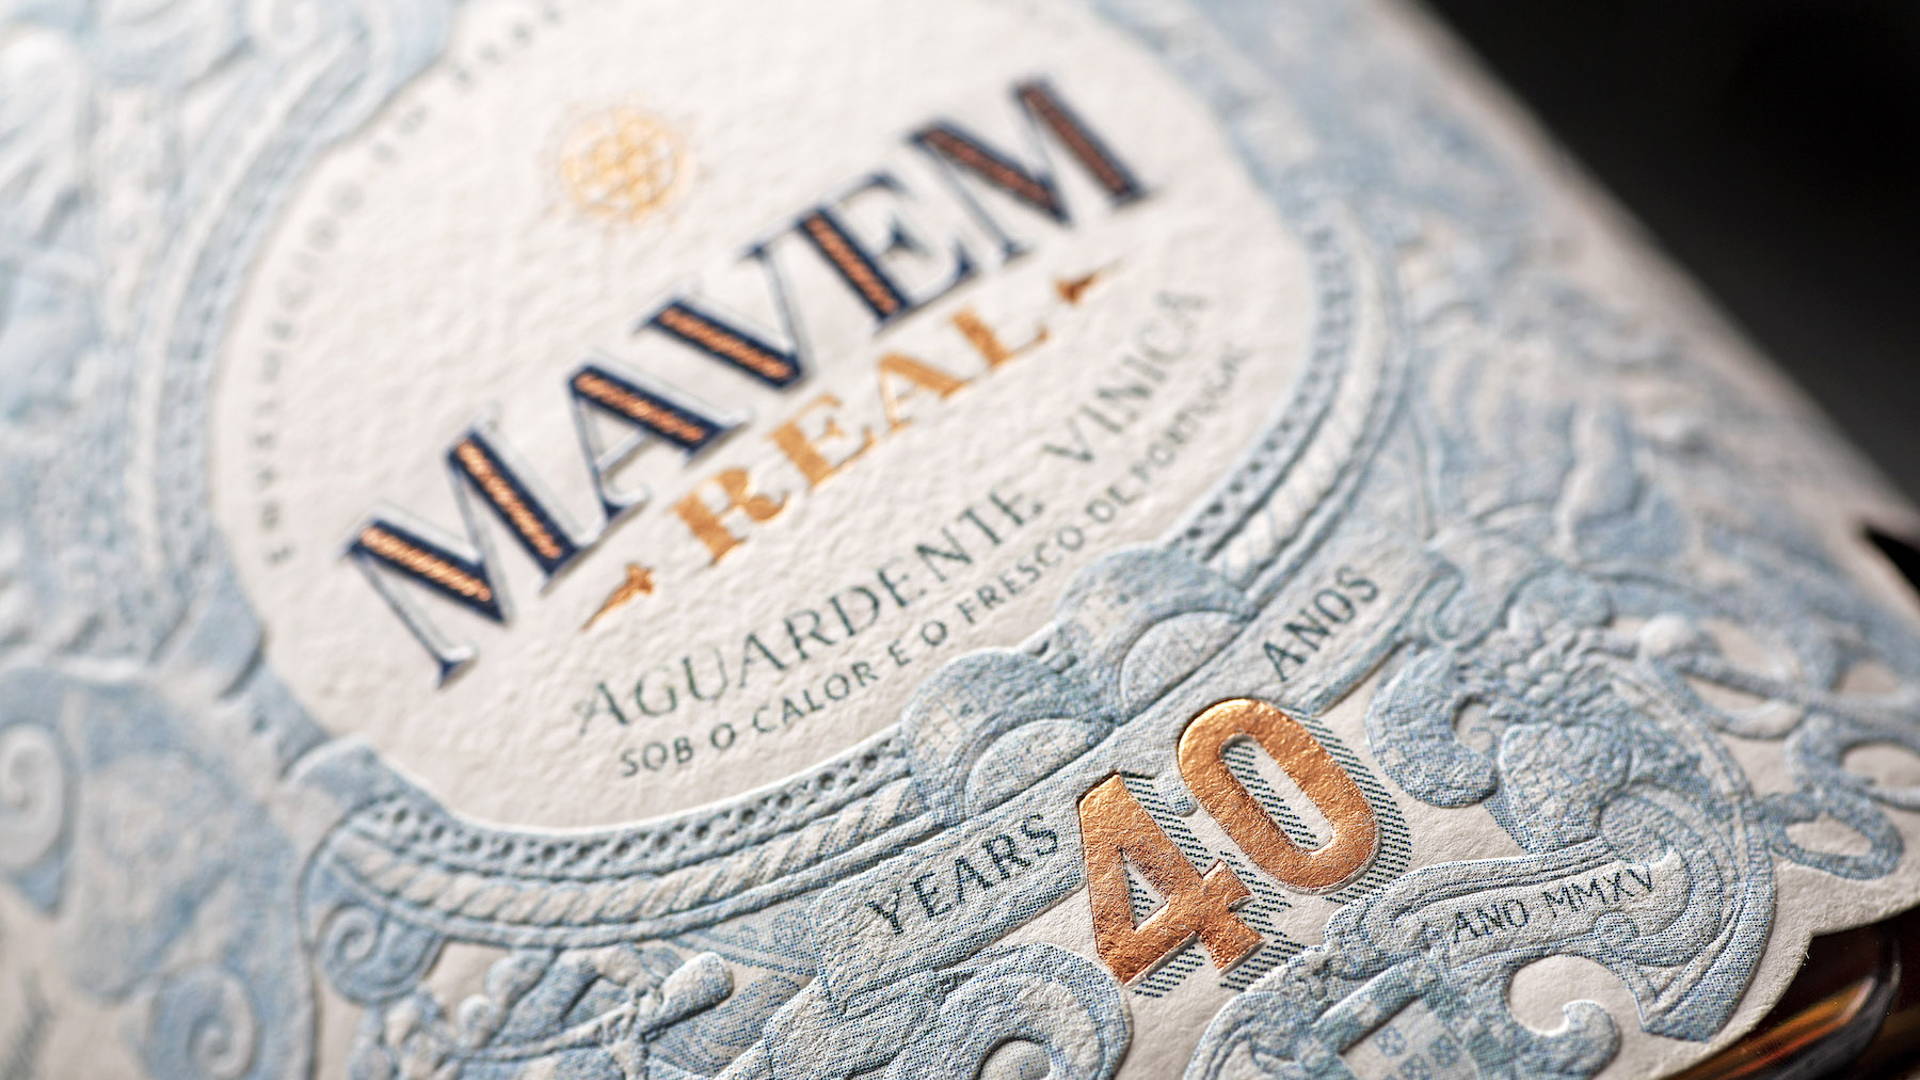 Featured image for This Beautiful Brandy is the Golden Age of Portugal in a Bottle